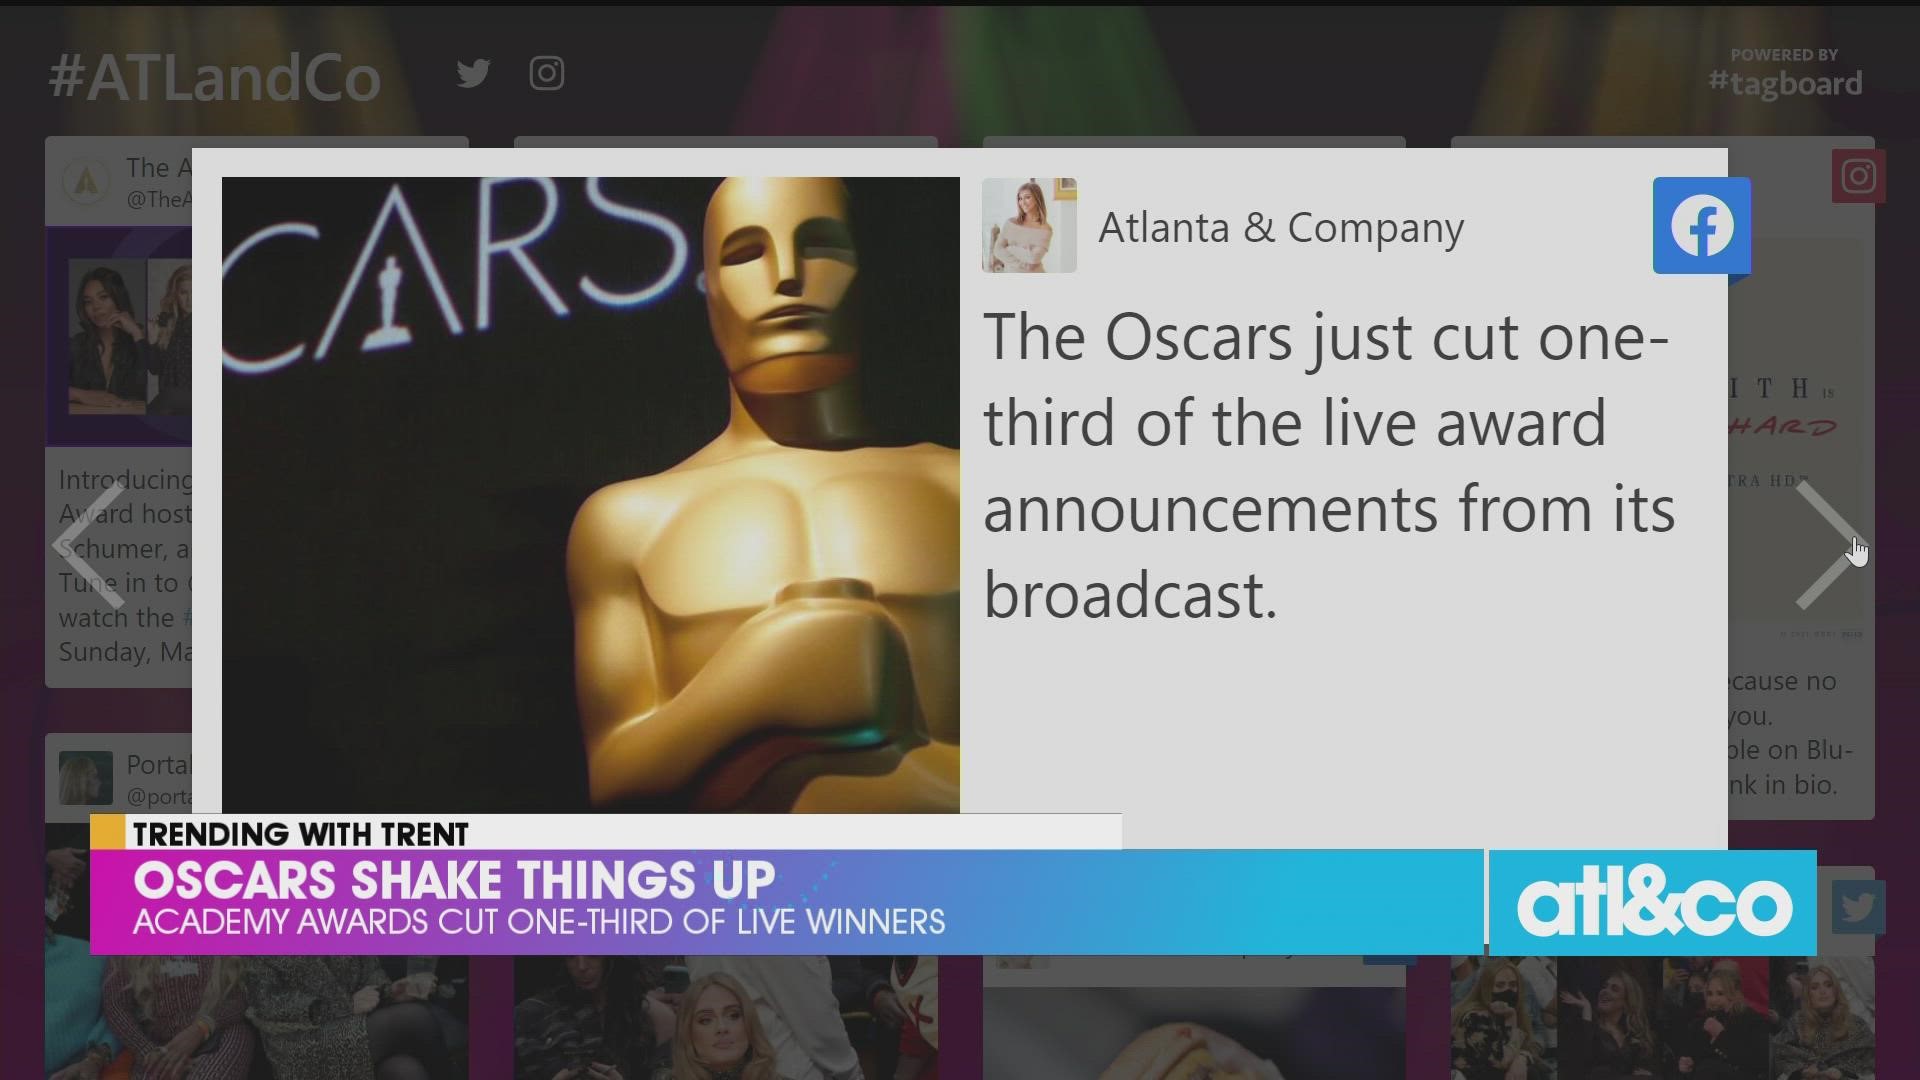 The Academy Awards are cutting one-third of the live awards announcements from its broadcast.